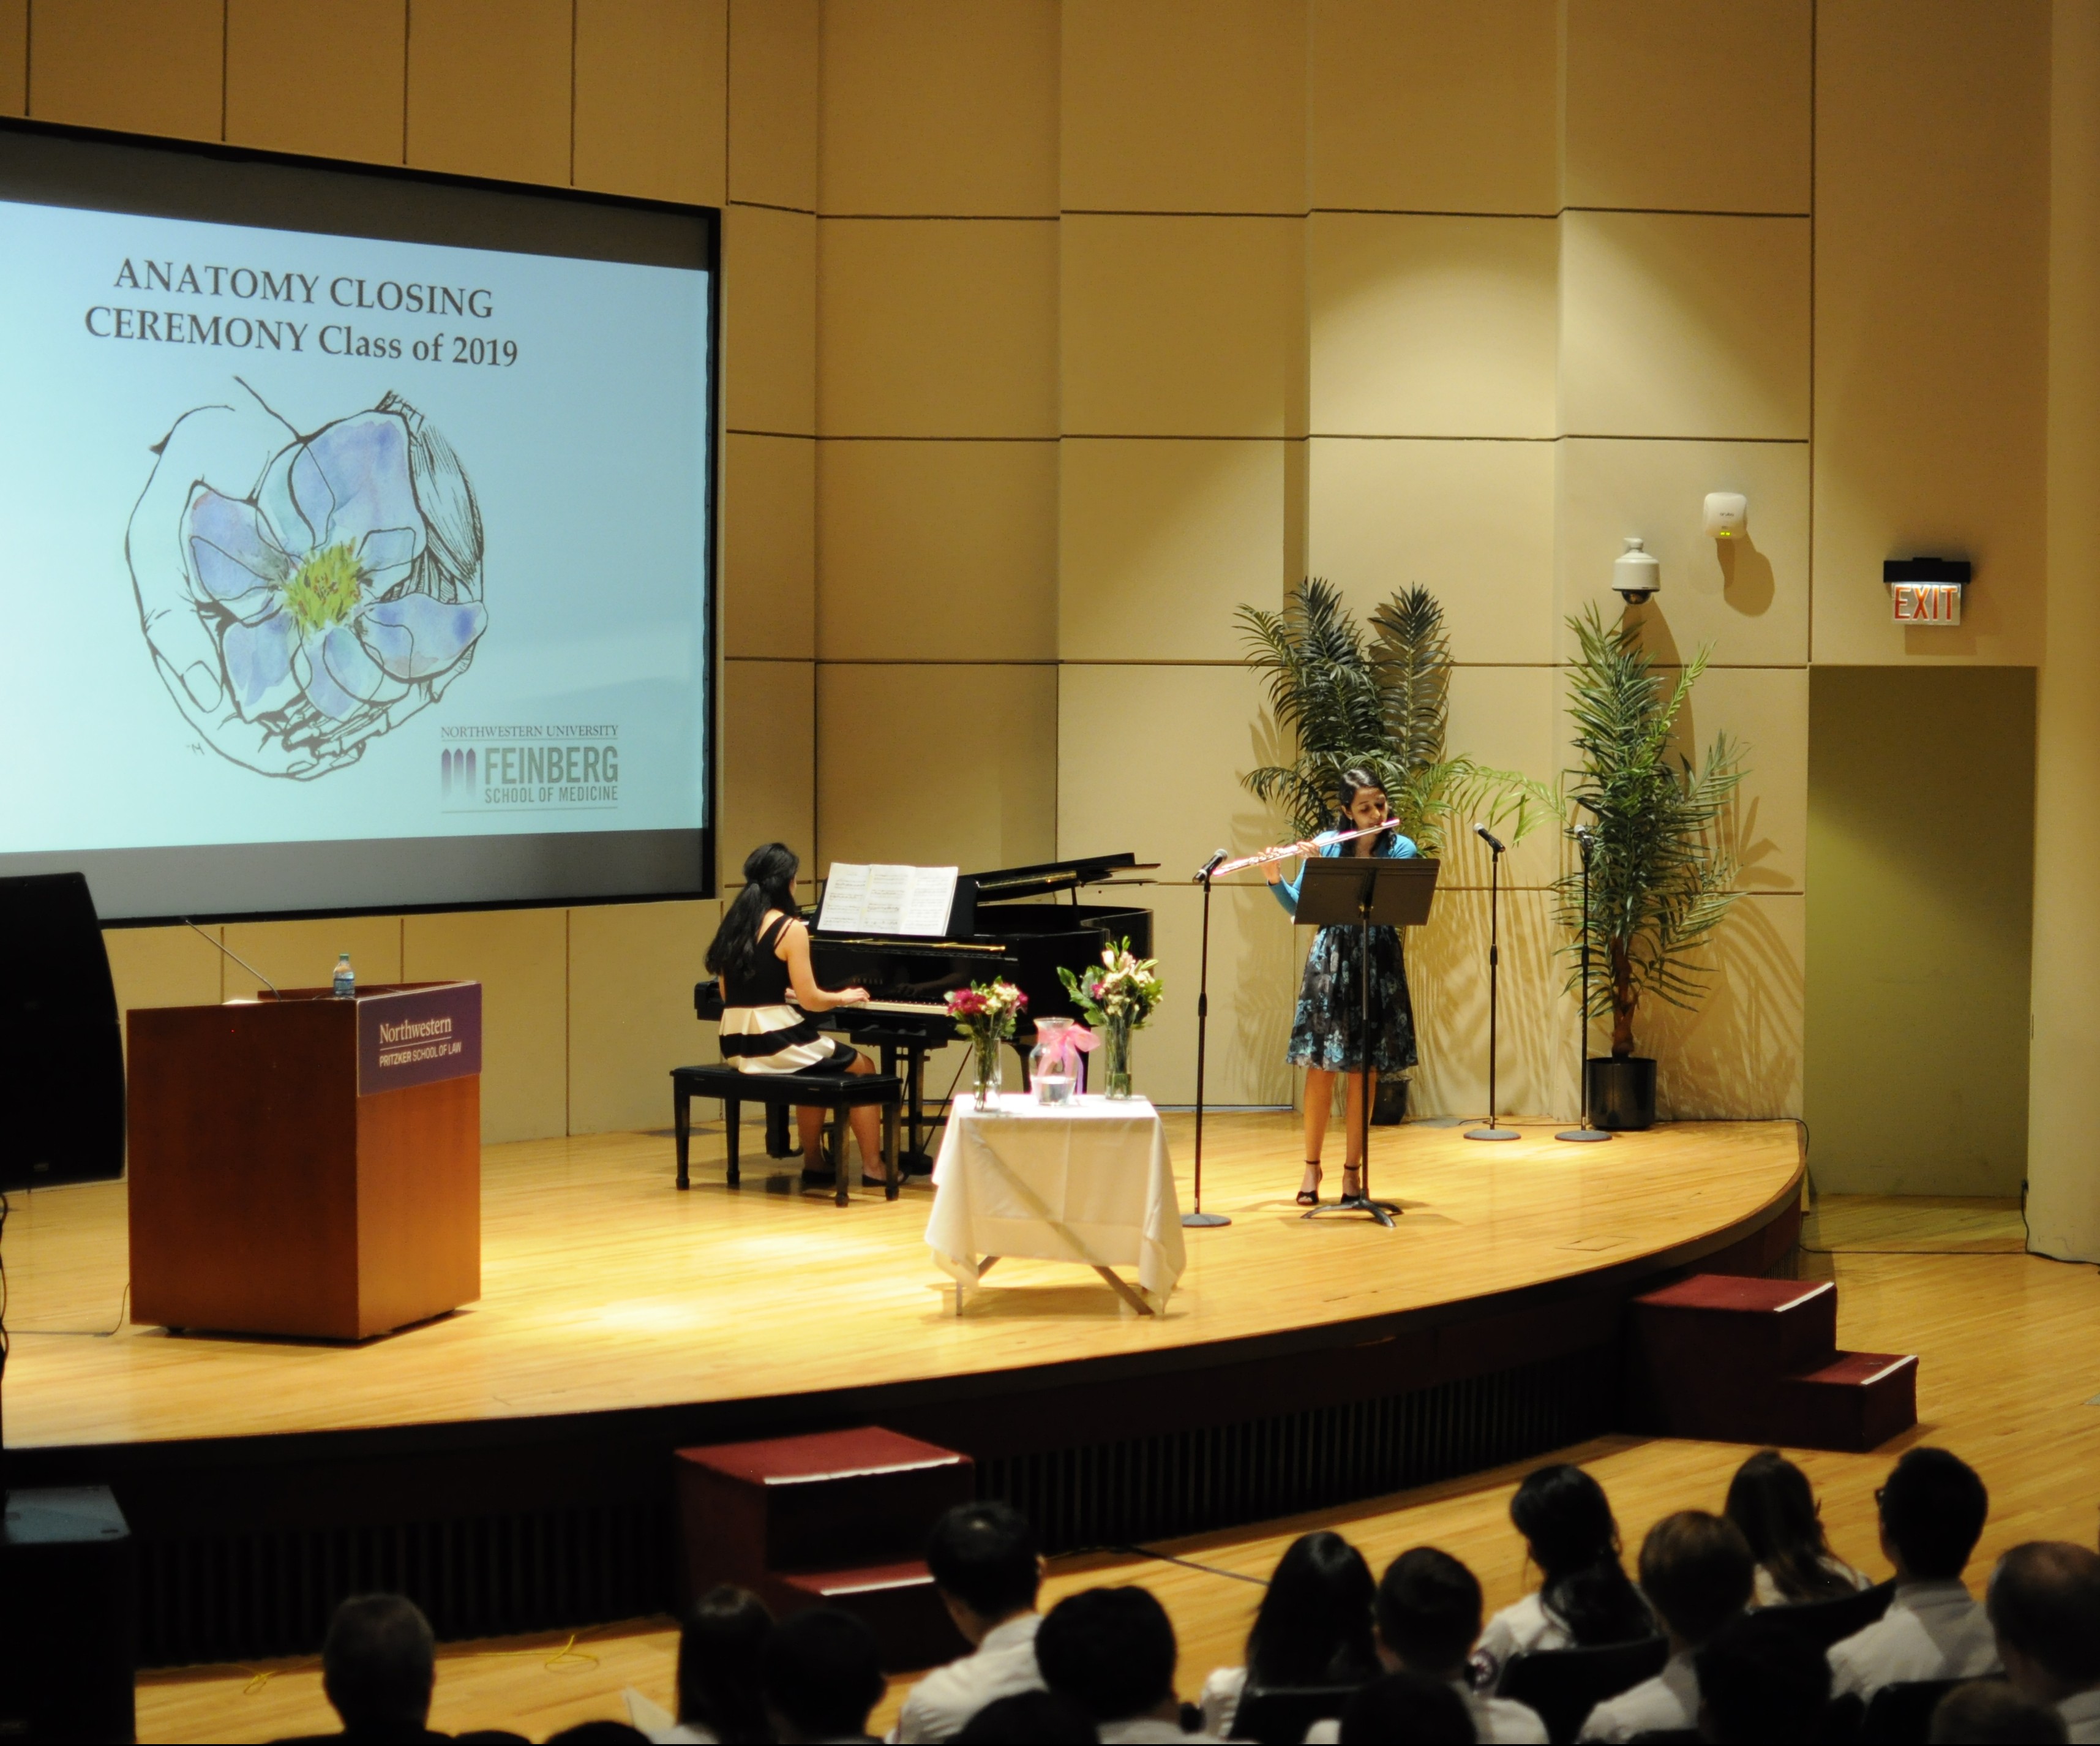 Supriya Immanemi played “Andante in C Major K. 315” by W. A. Mozart on flute with Tonia Cao on piano, during a ceremony to pay tribute to the people who donated their bodies for their anatomy course.